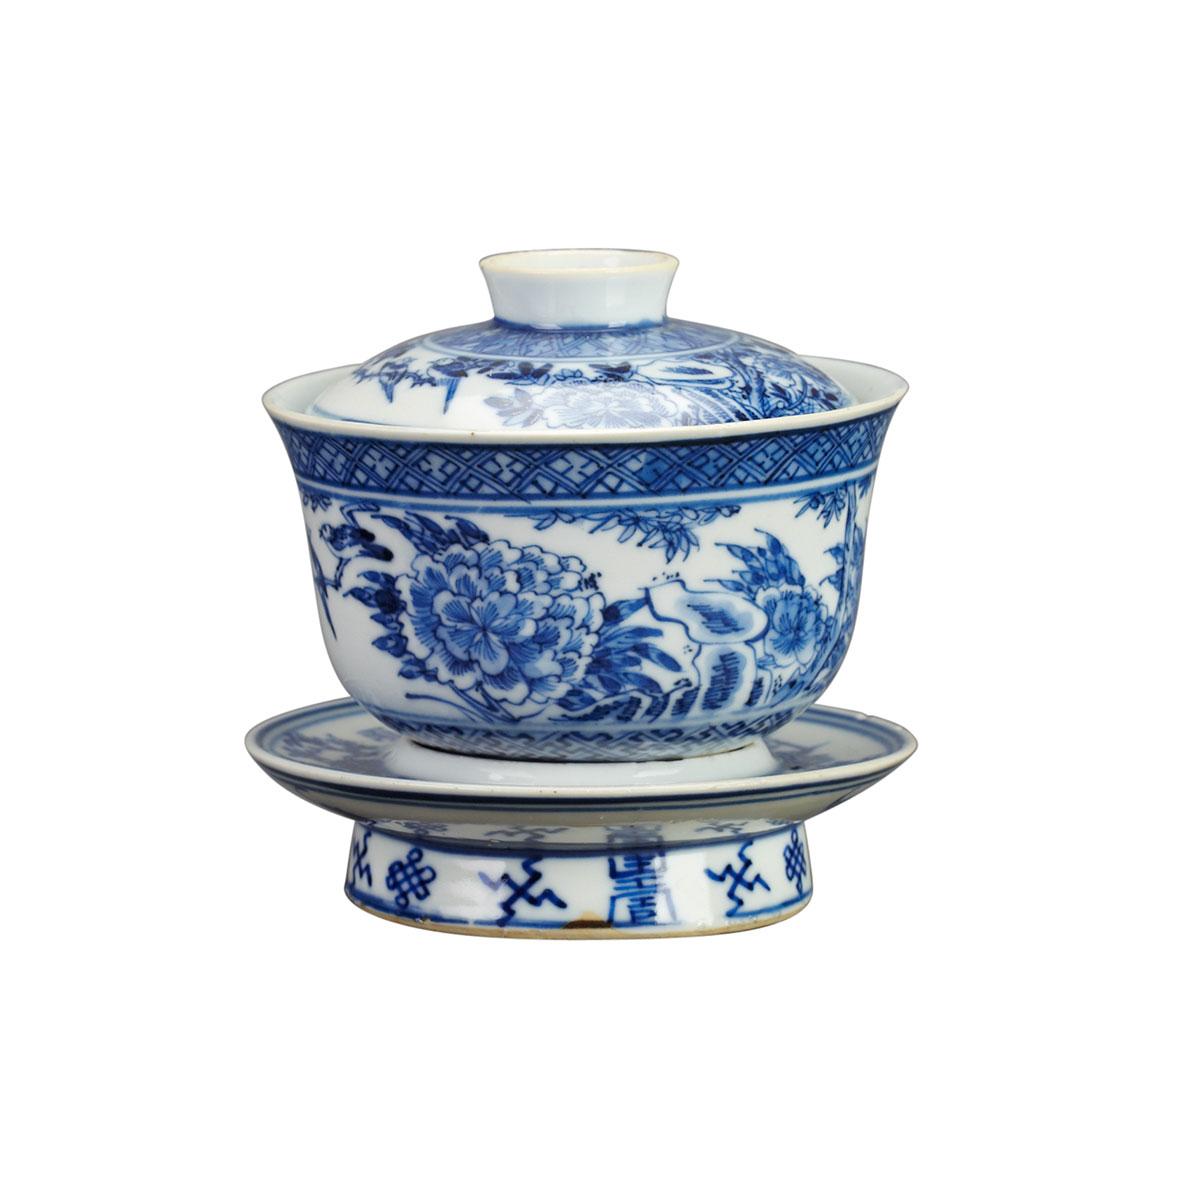 Blue and White Tea Bowl and Cover, 19th Century